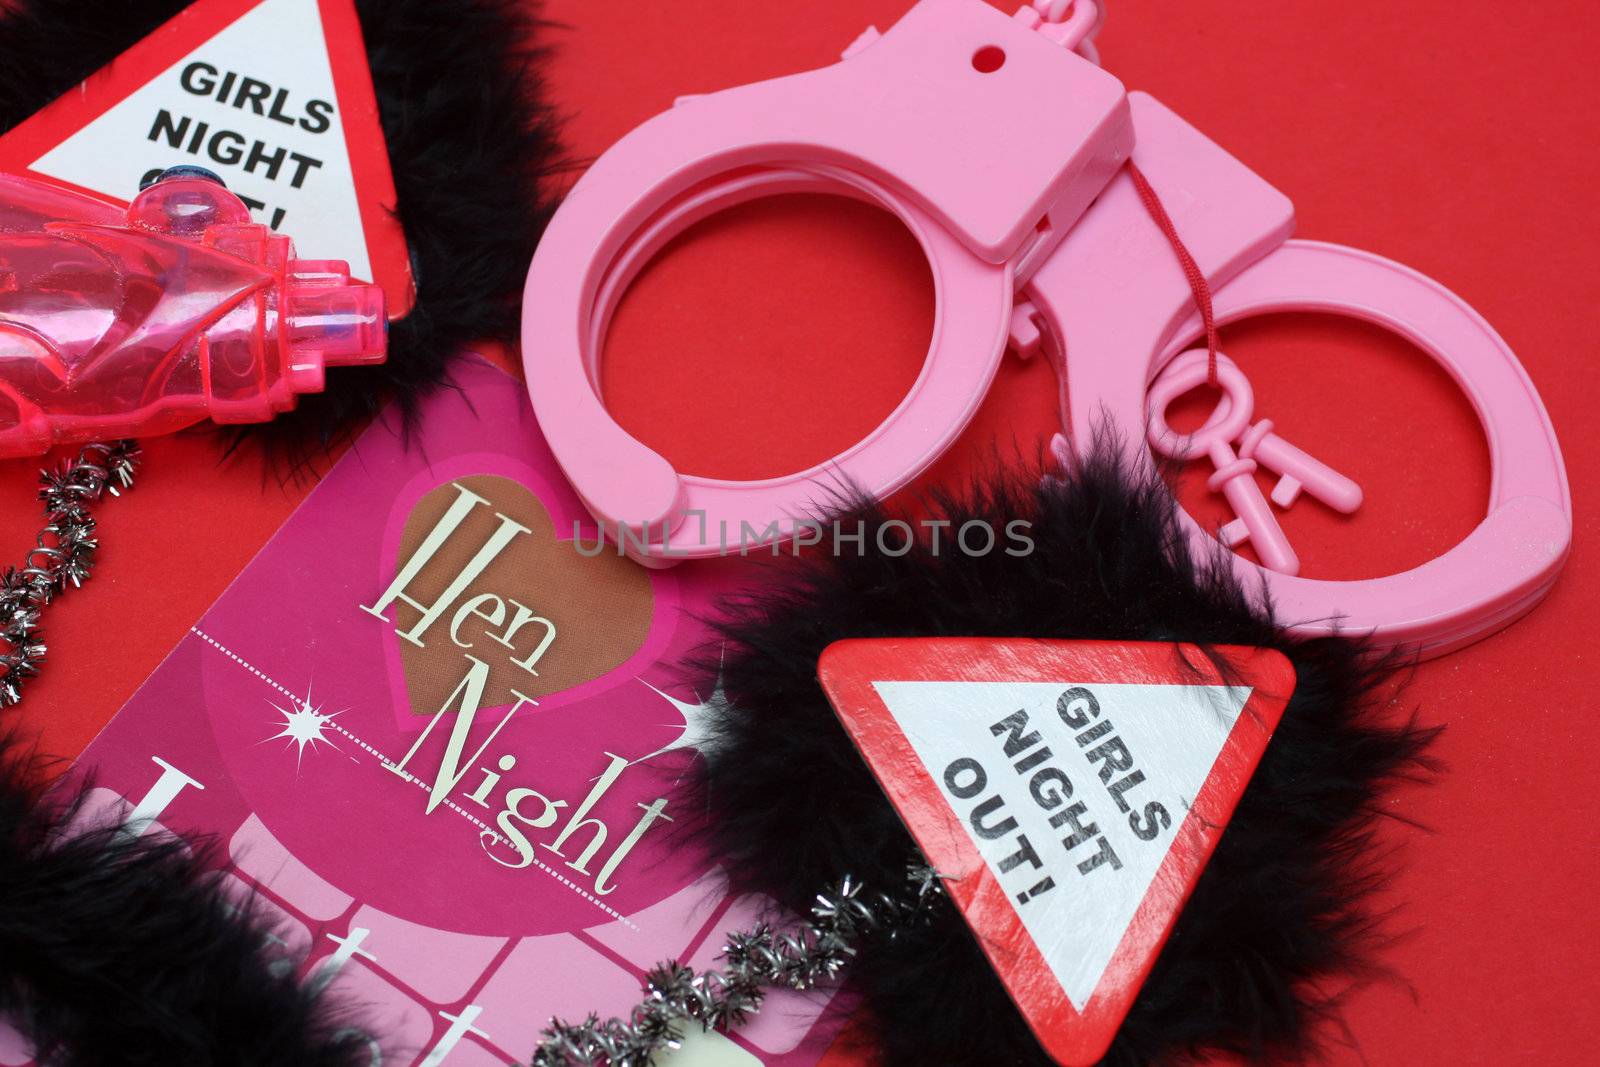 accessories for a hen night out